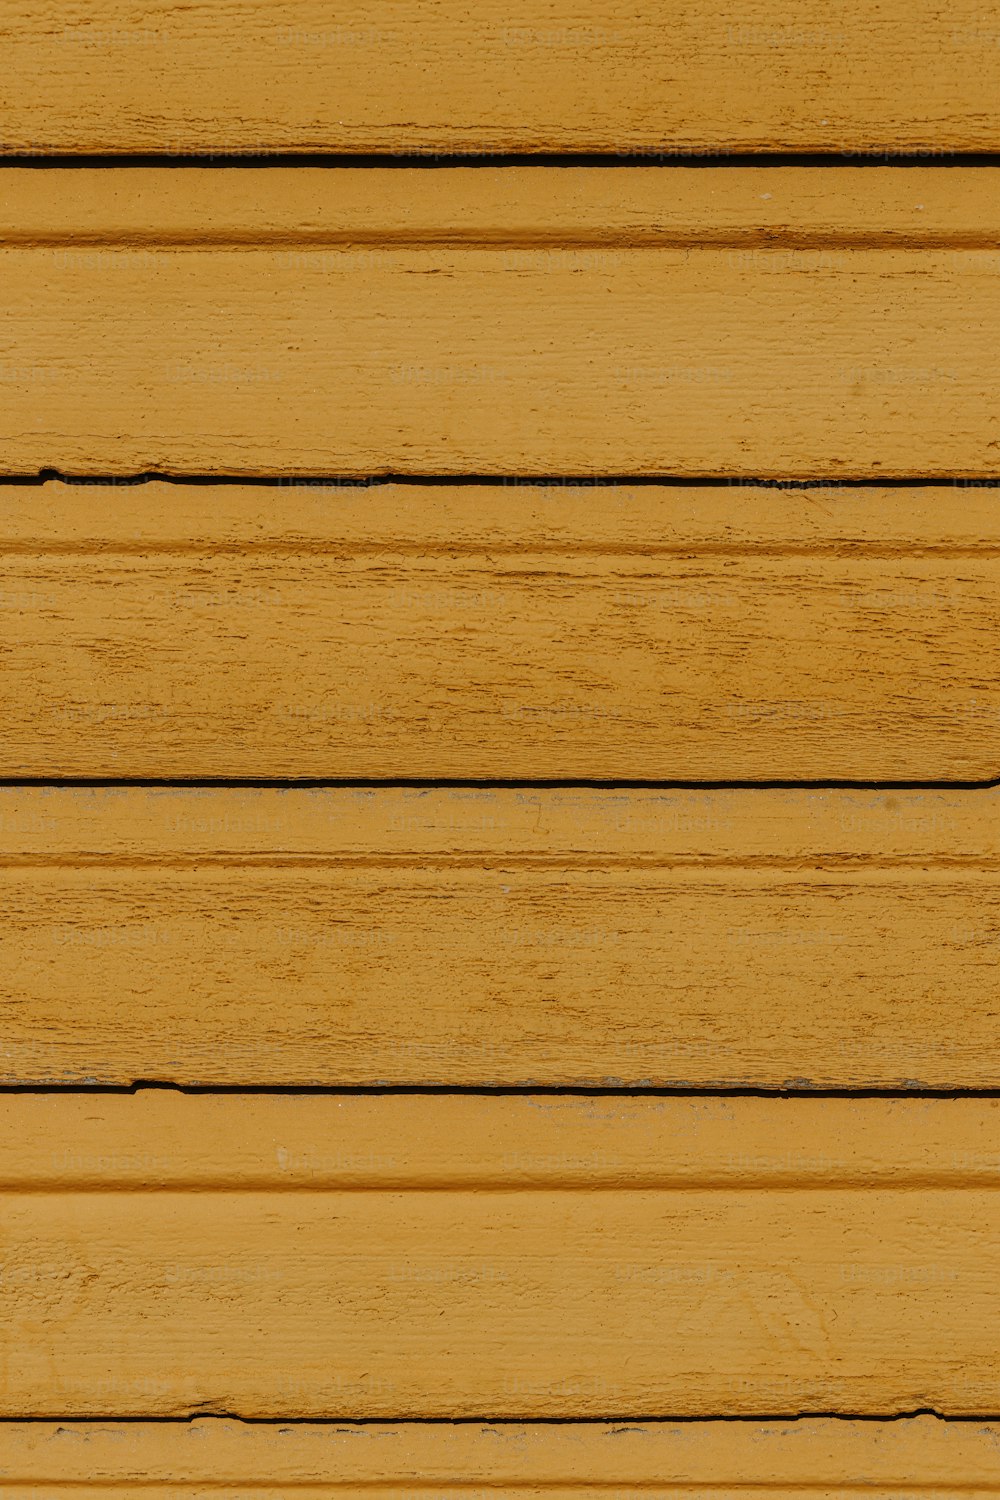 Wooden Plank Pictures  Download Free Images on Unsplash